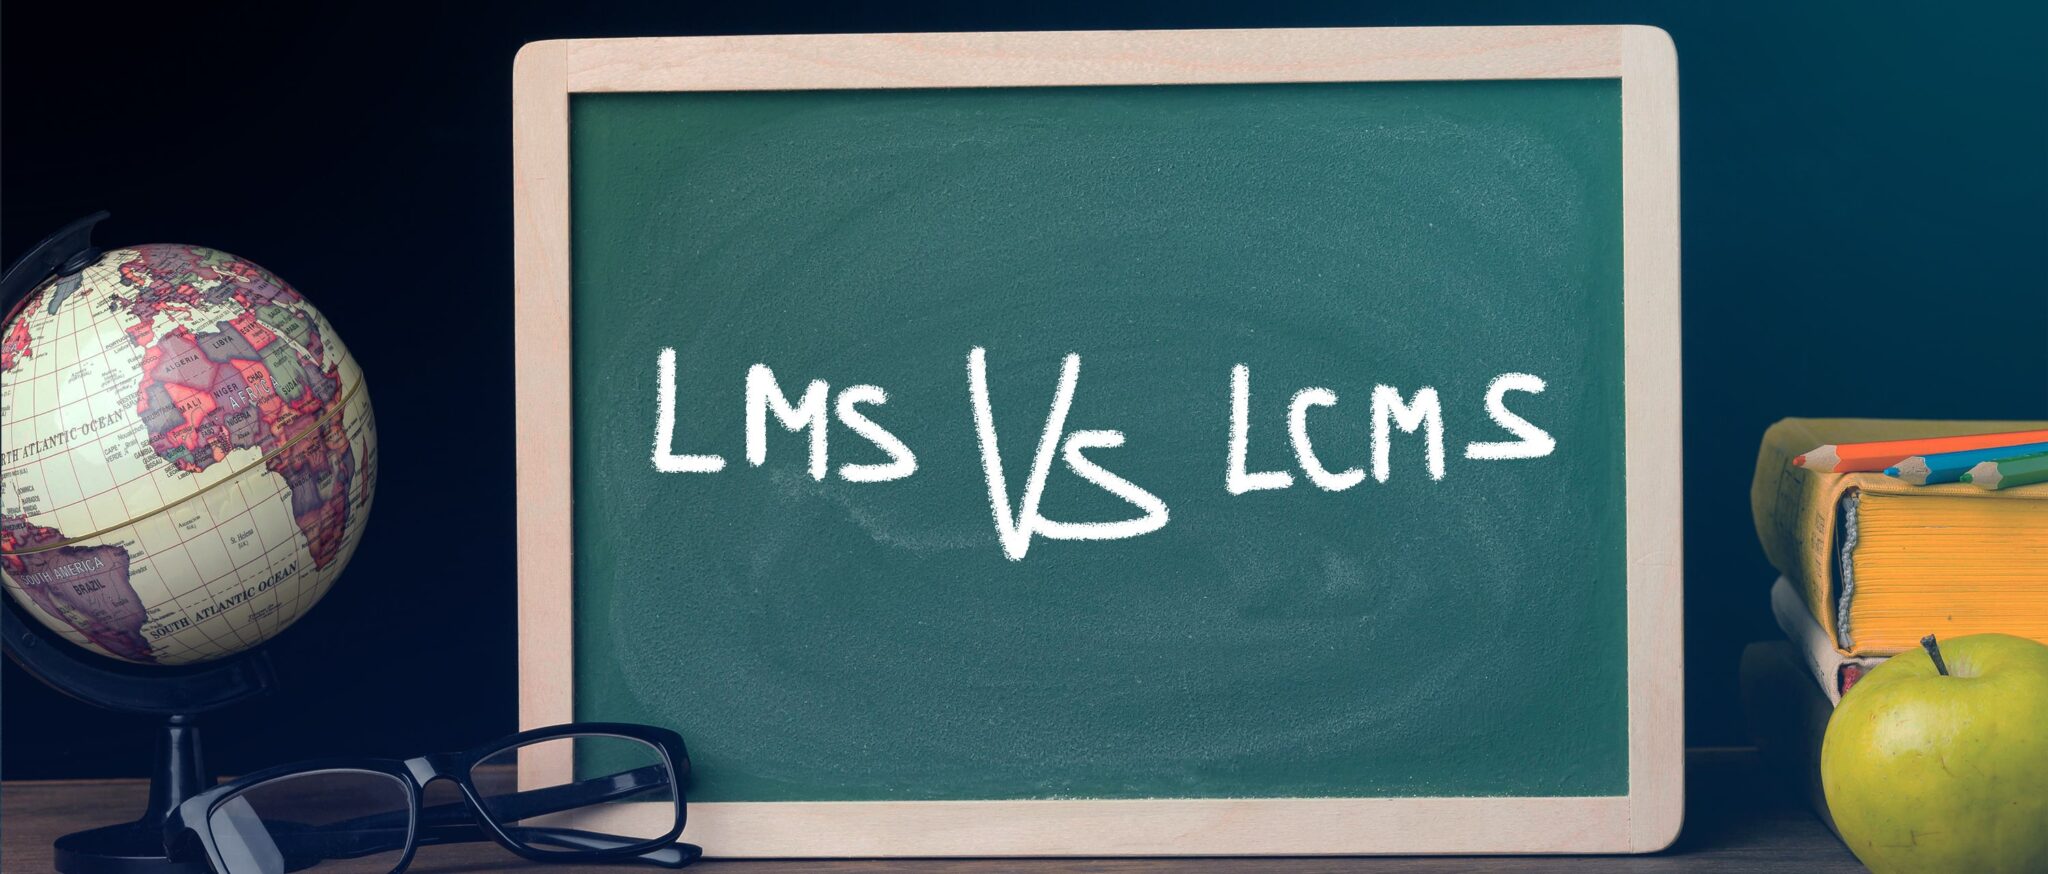 LMS vs LCMS: Learning Management System Differences and Features Comparison | Inoxoft